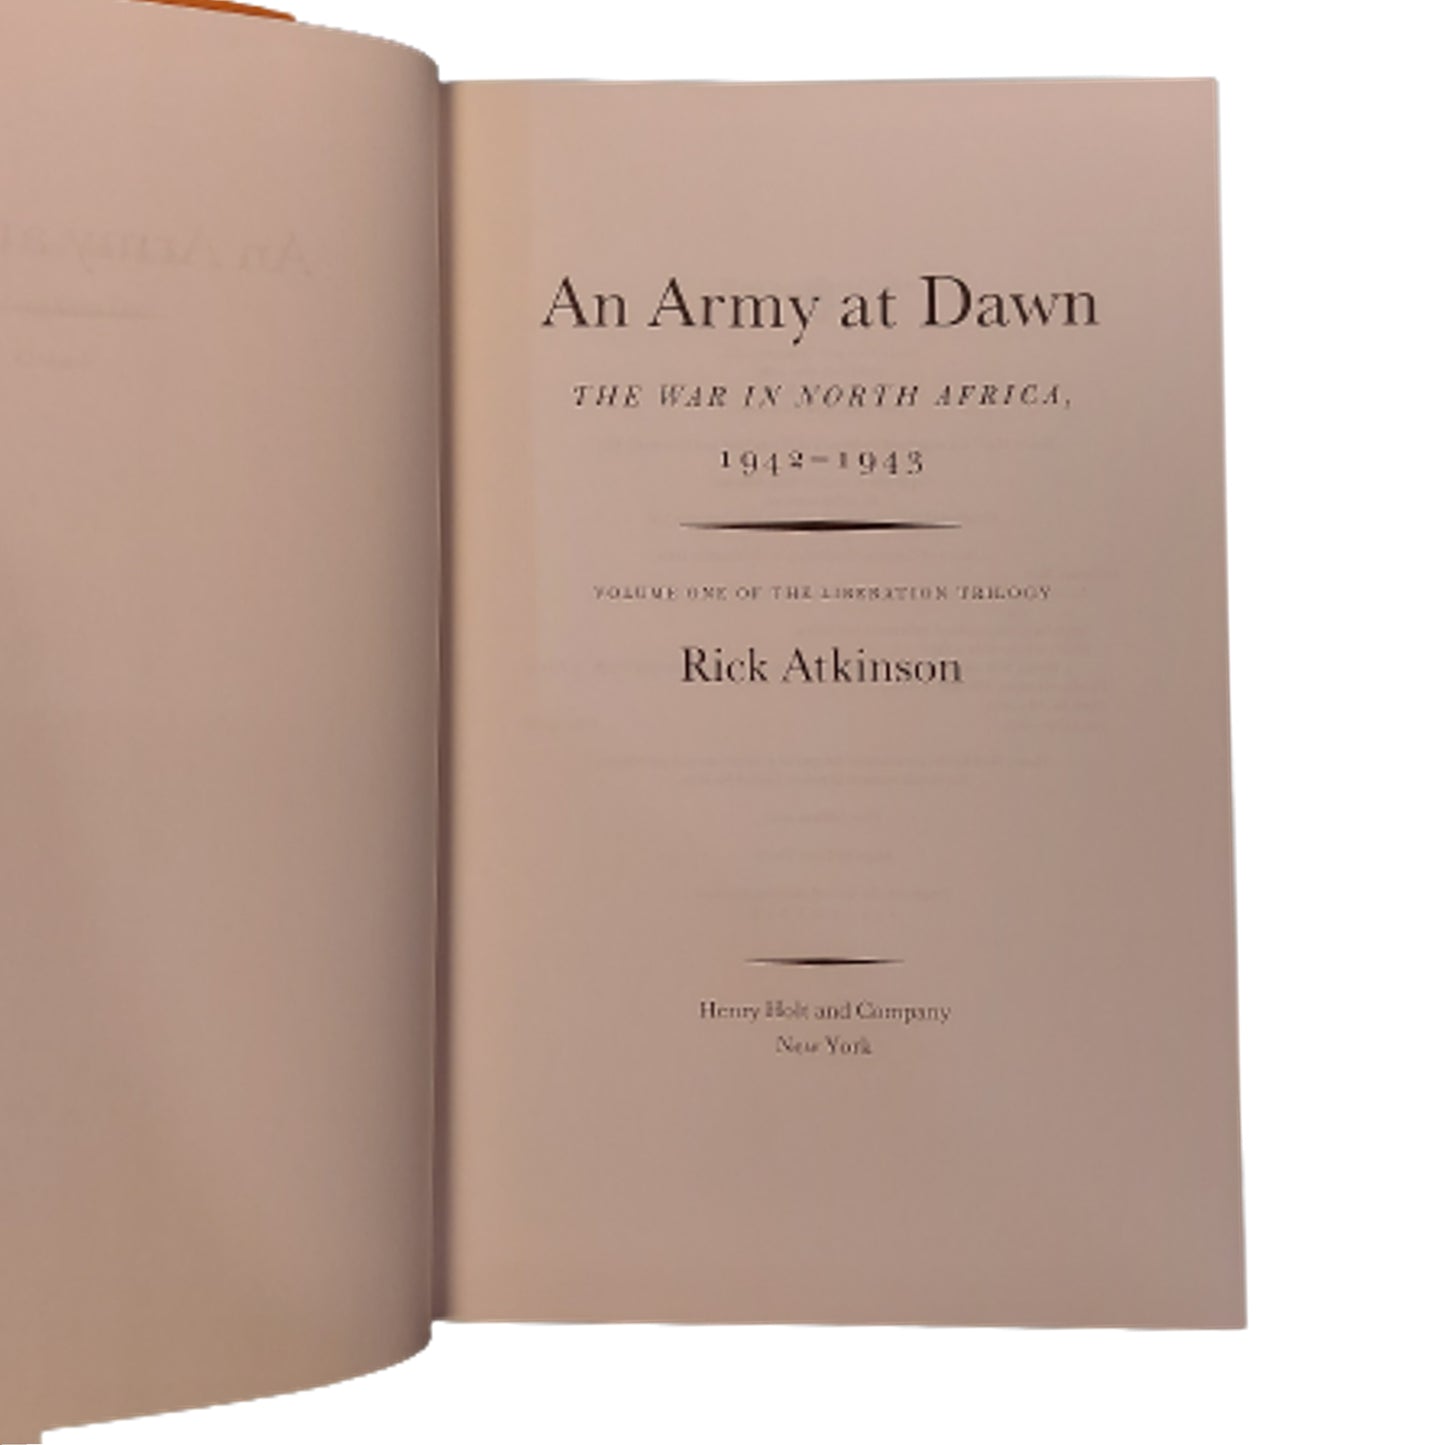 An Army At Dawn -The War In North Africa 1942-1943